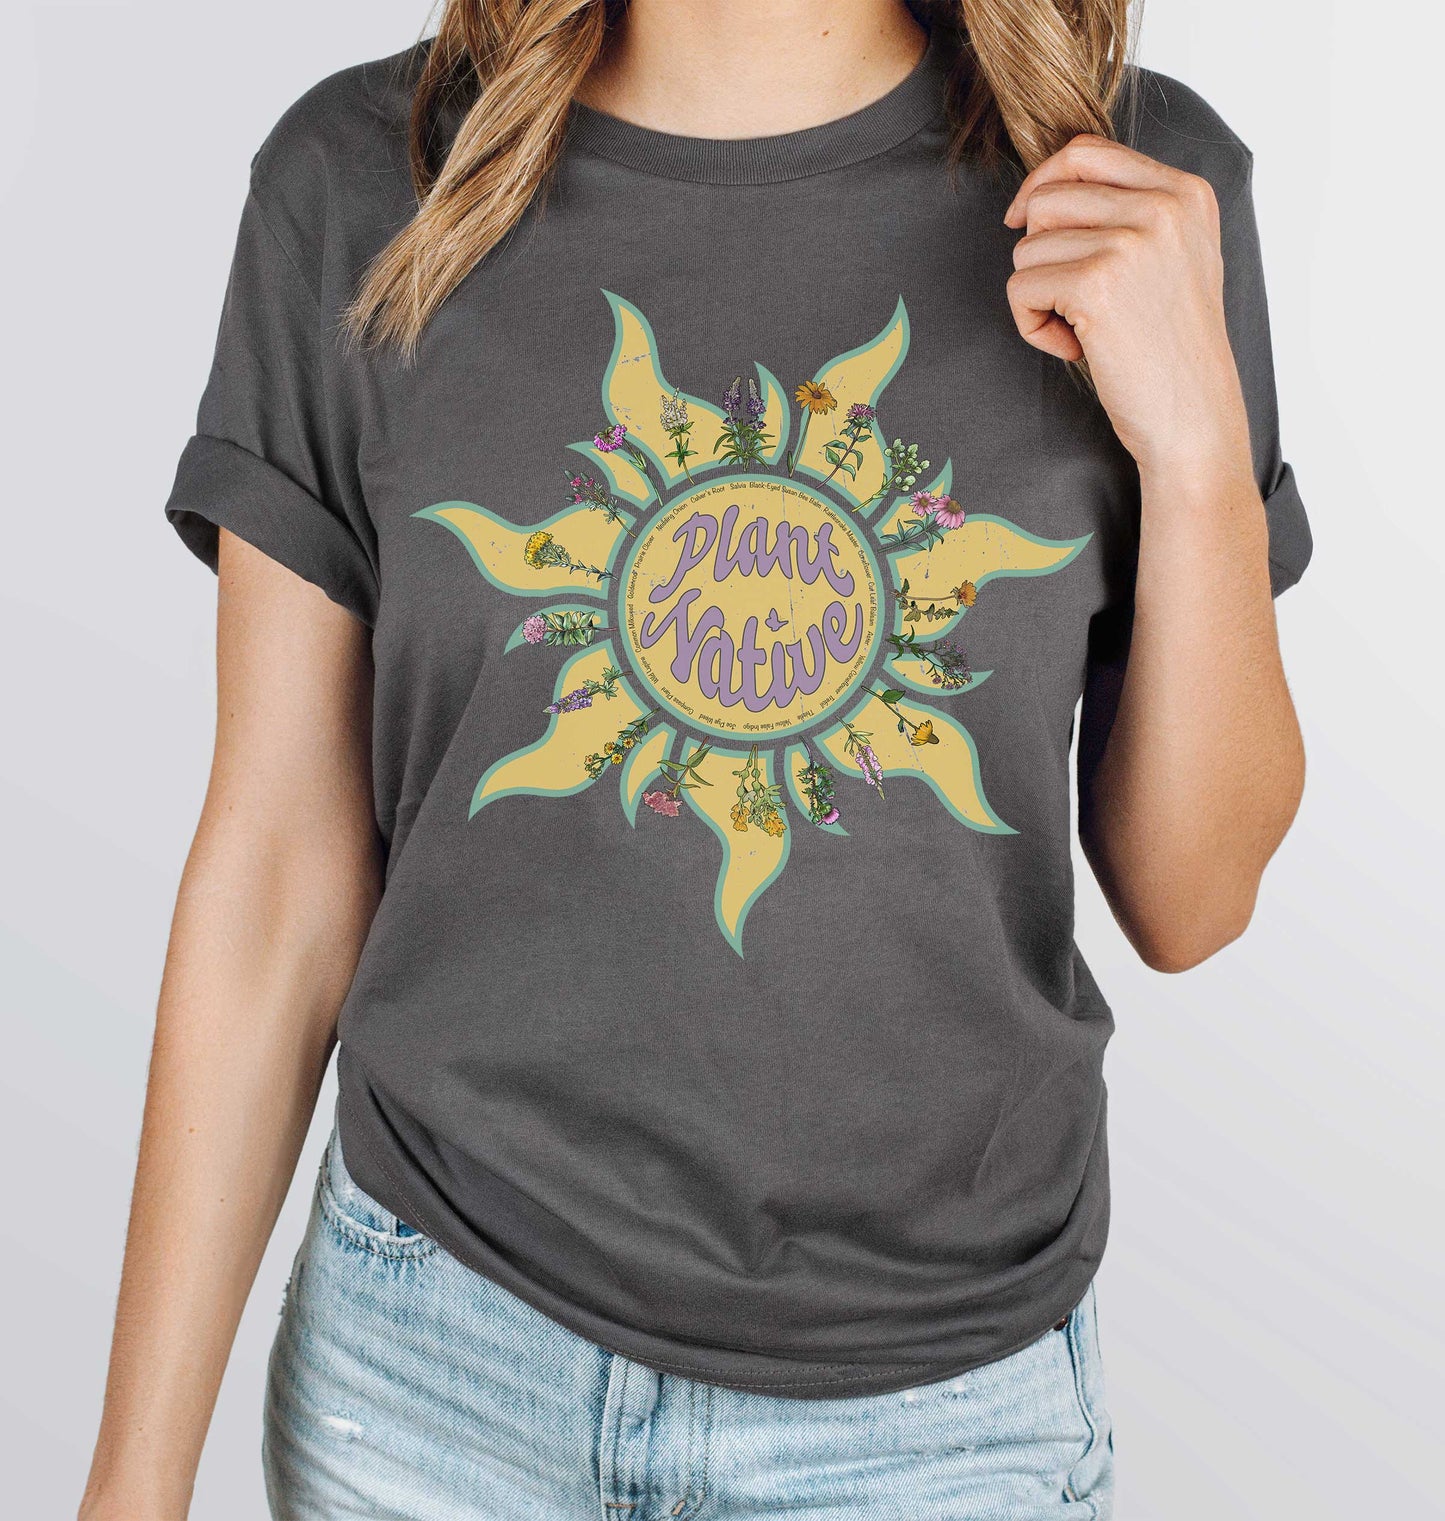 Sunny Plant Native shirt, Save Native Plants, Conservation, ecology, Nature Lover, Naturalist, Environment, Gardener gift, gift for Mom